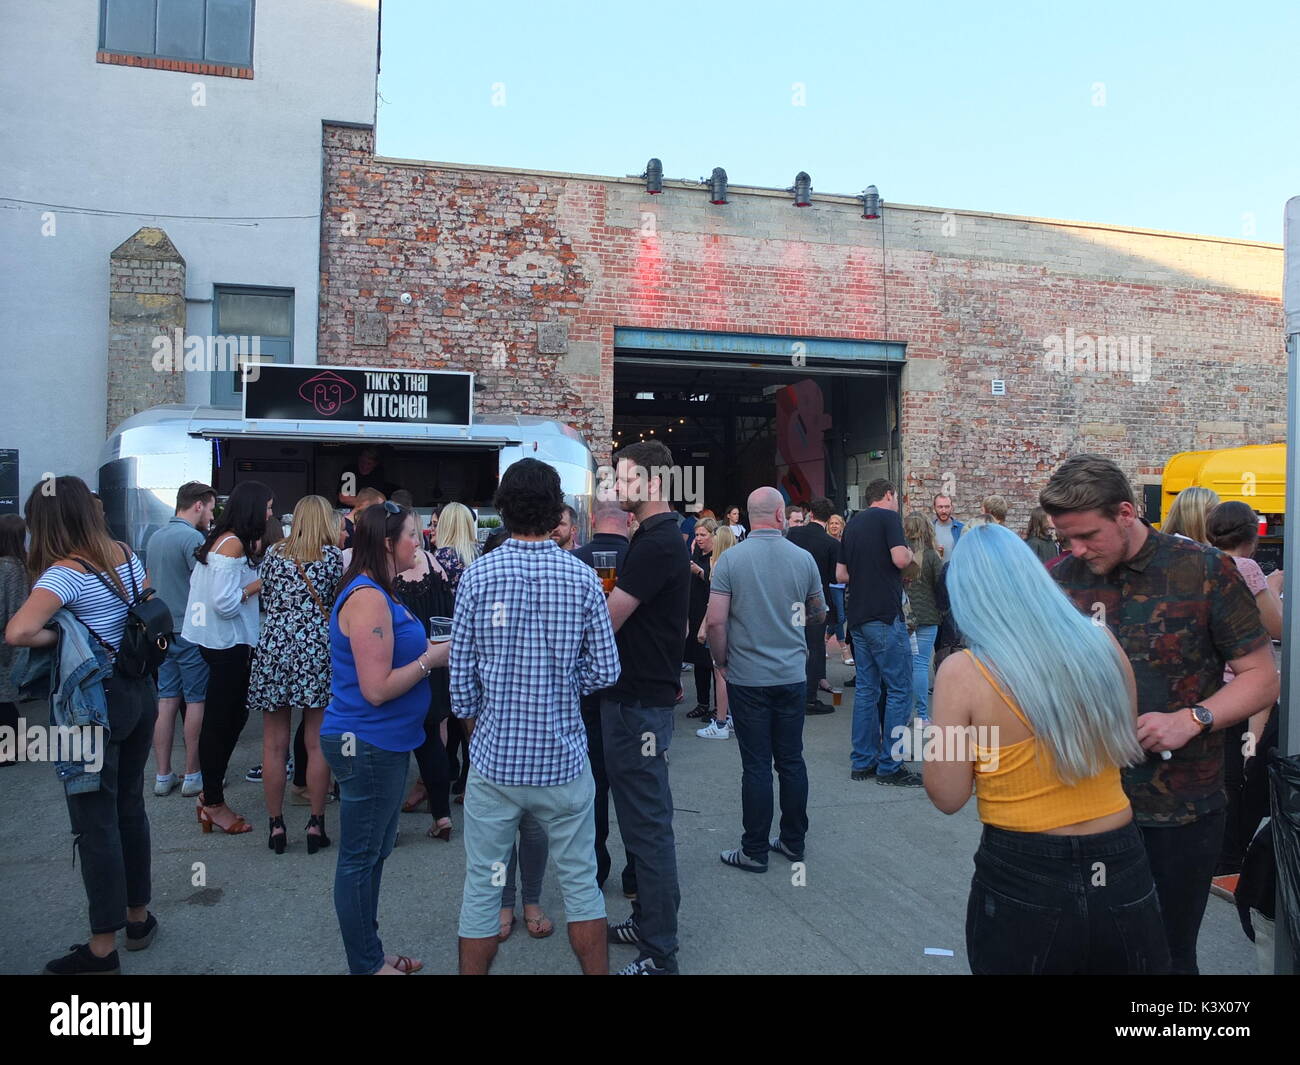 Hipsters and families attending Peddler Night Market, a popular monthly showcase for street food stalls and makers in Kelham Island, Sheffield, UK Stock Photo